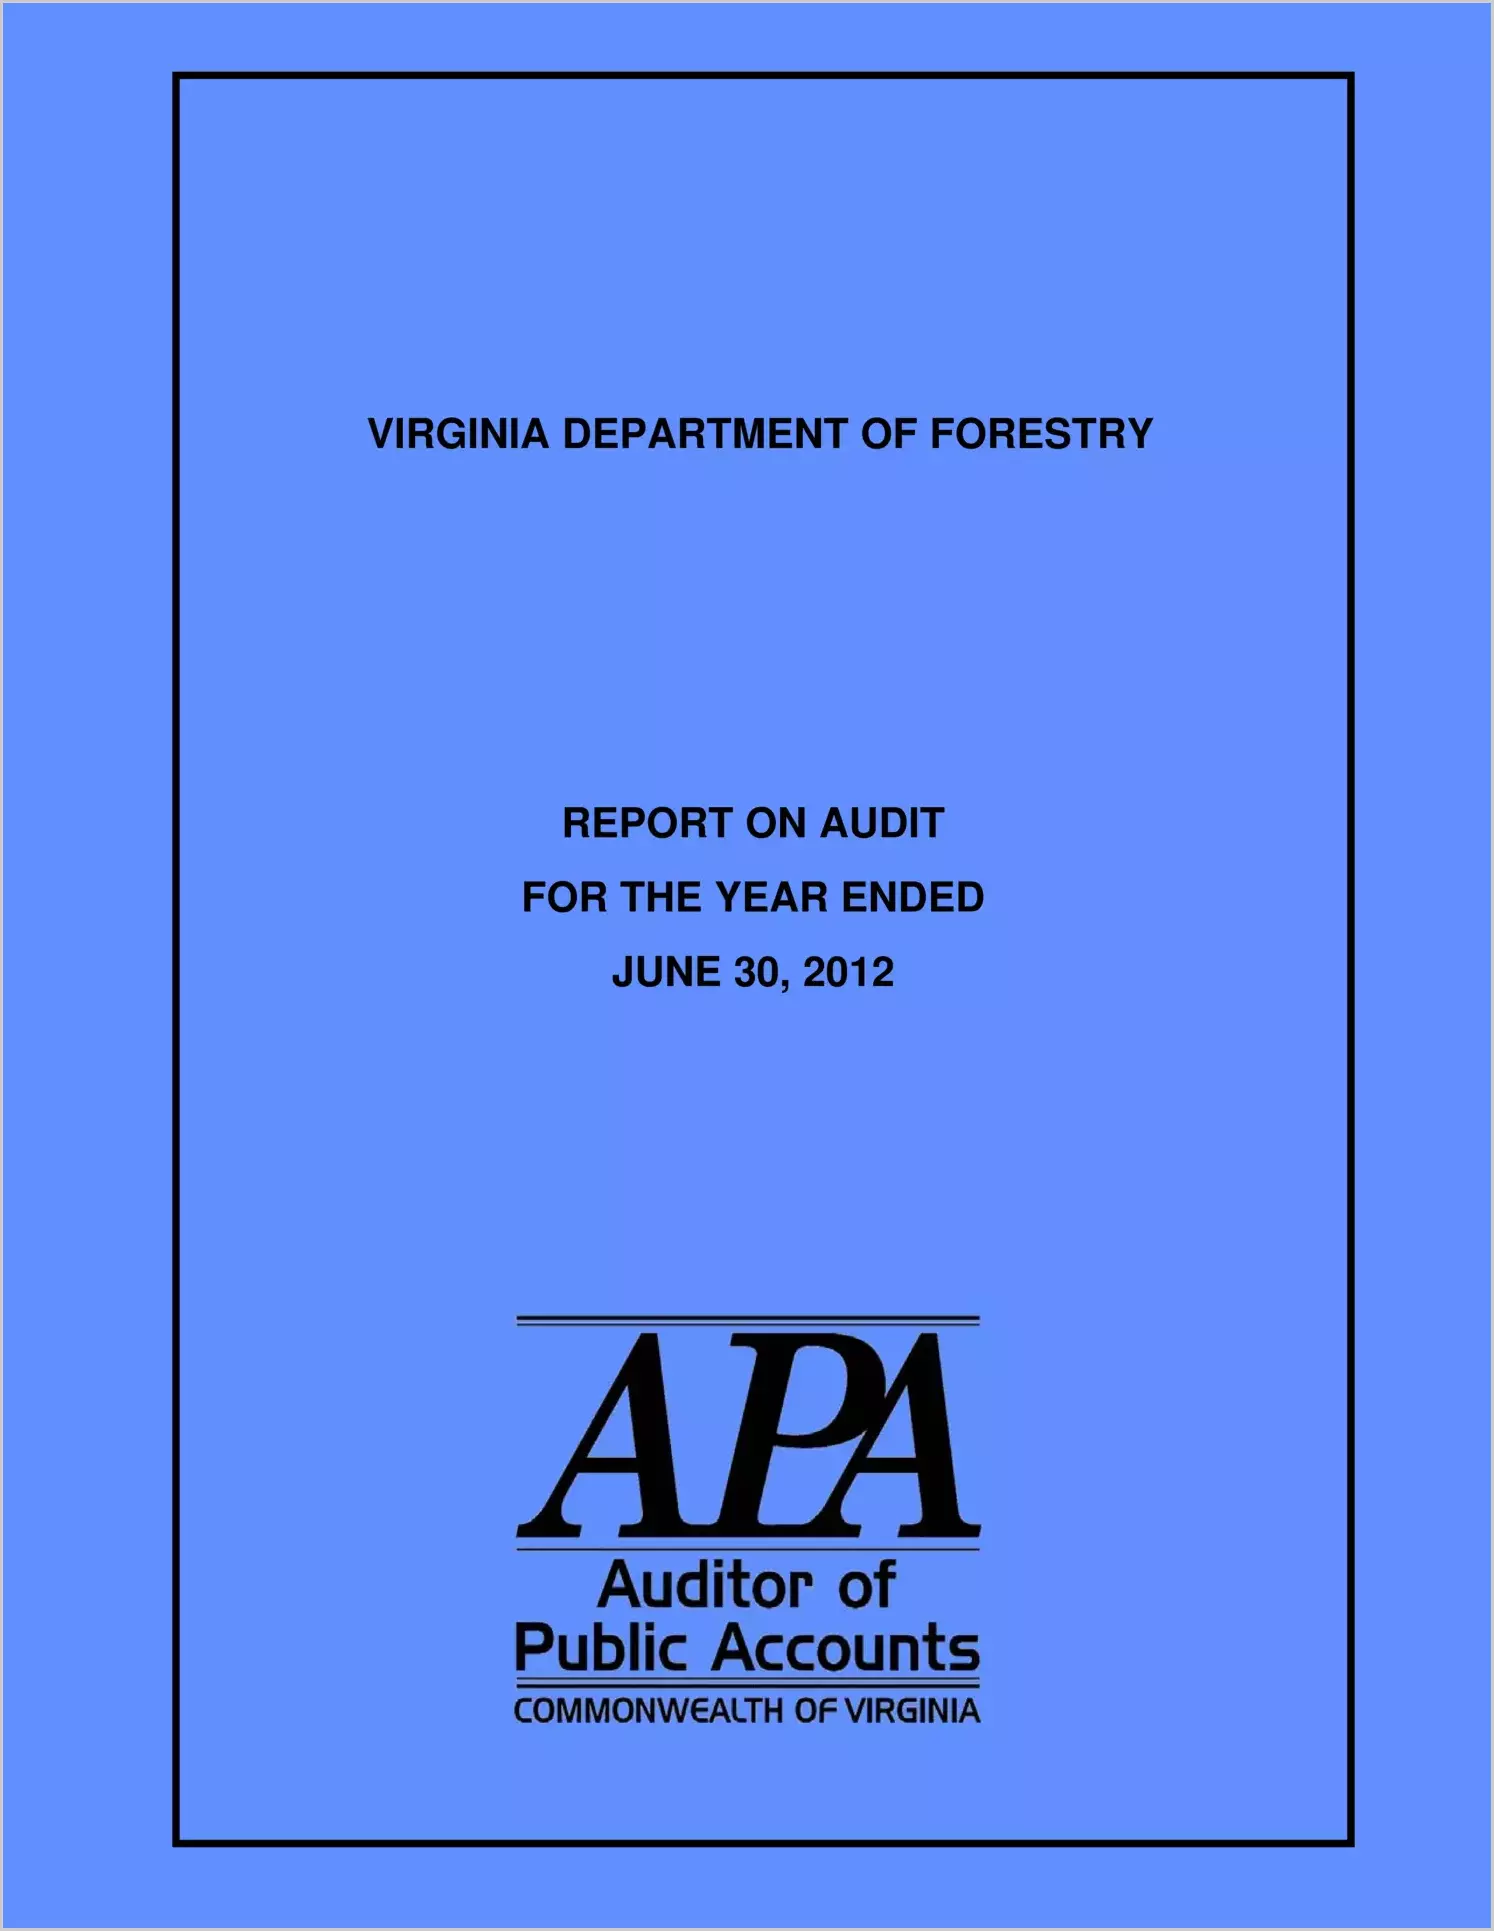 Virginia Department of Forestry for the year ended June 30, 2012